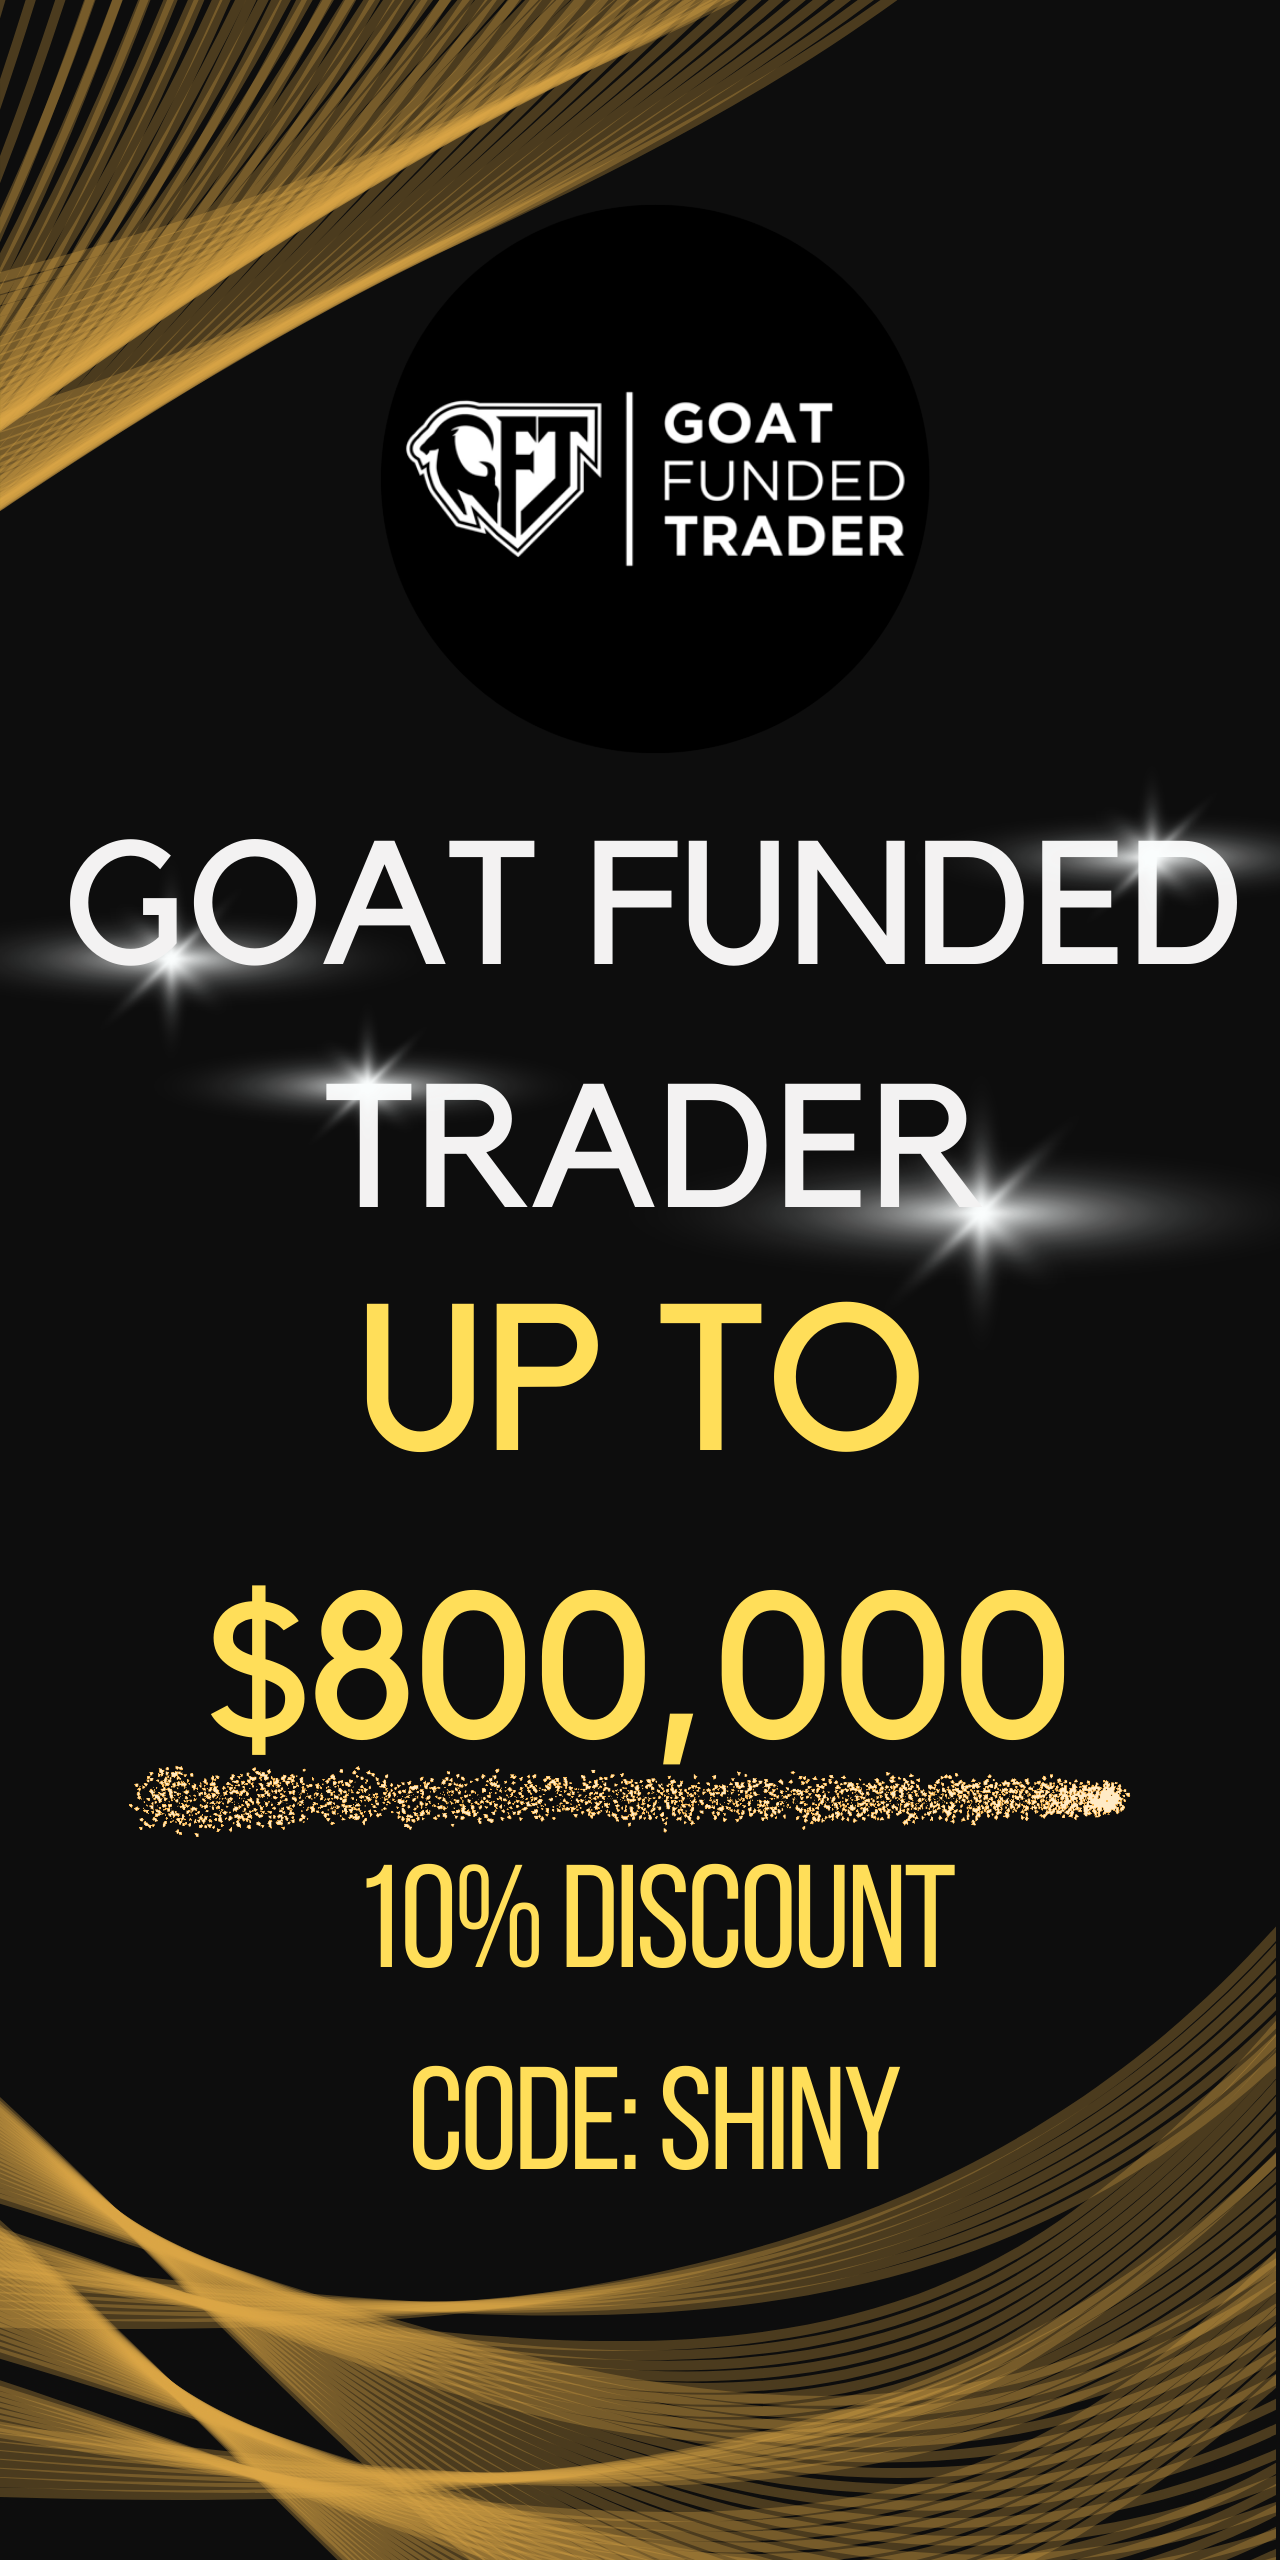 Goat Funded Trader the best Forex Prop Firm